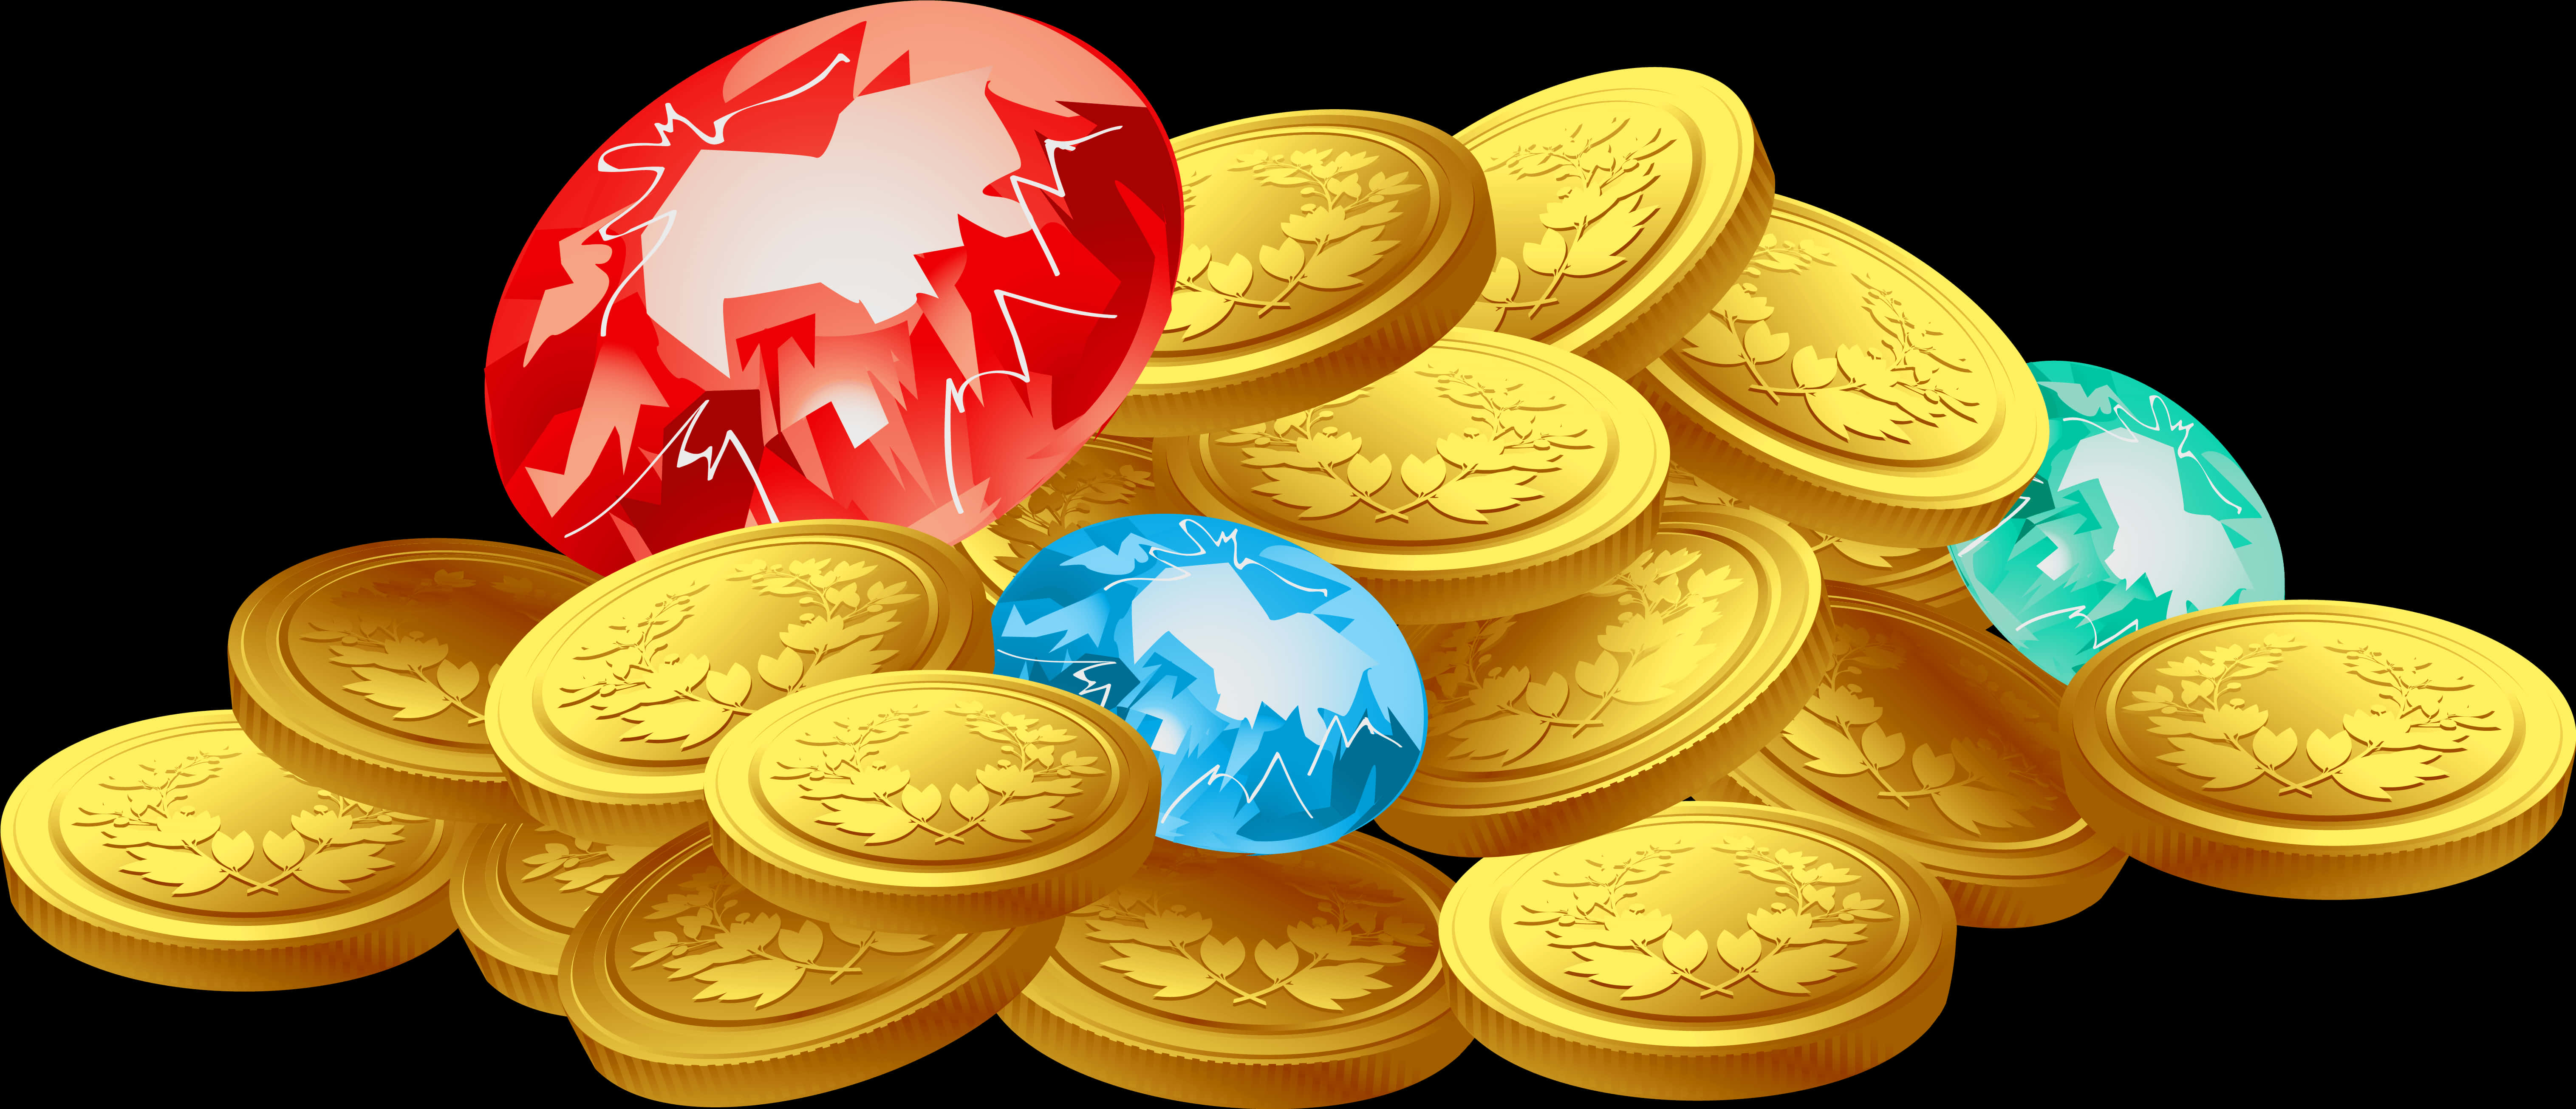 A Pile Of Gold Coins With A Red Ball And Blue Gems